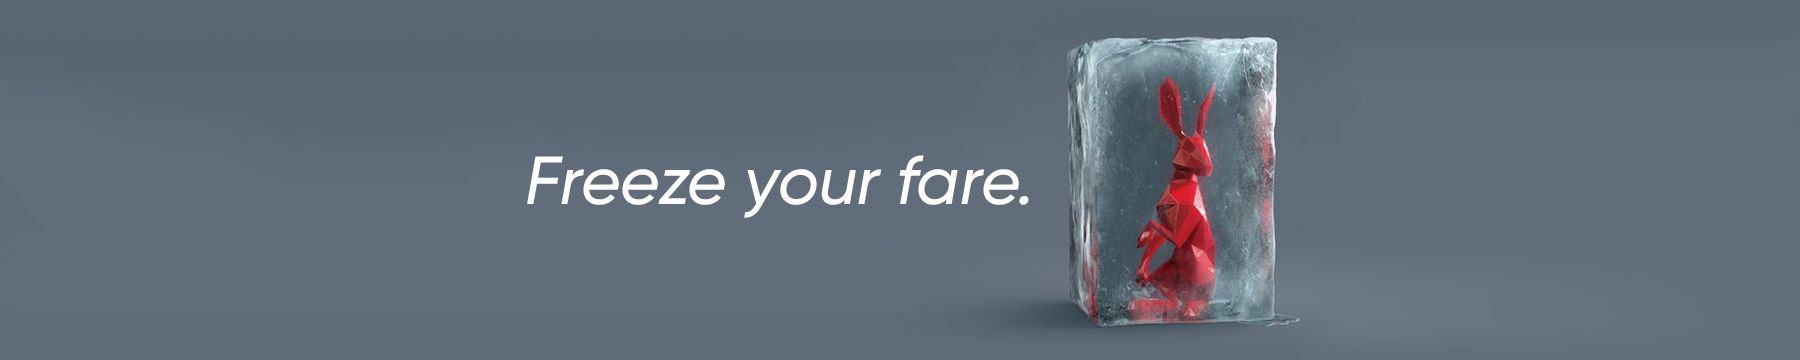 Freeze your fare